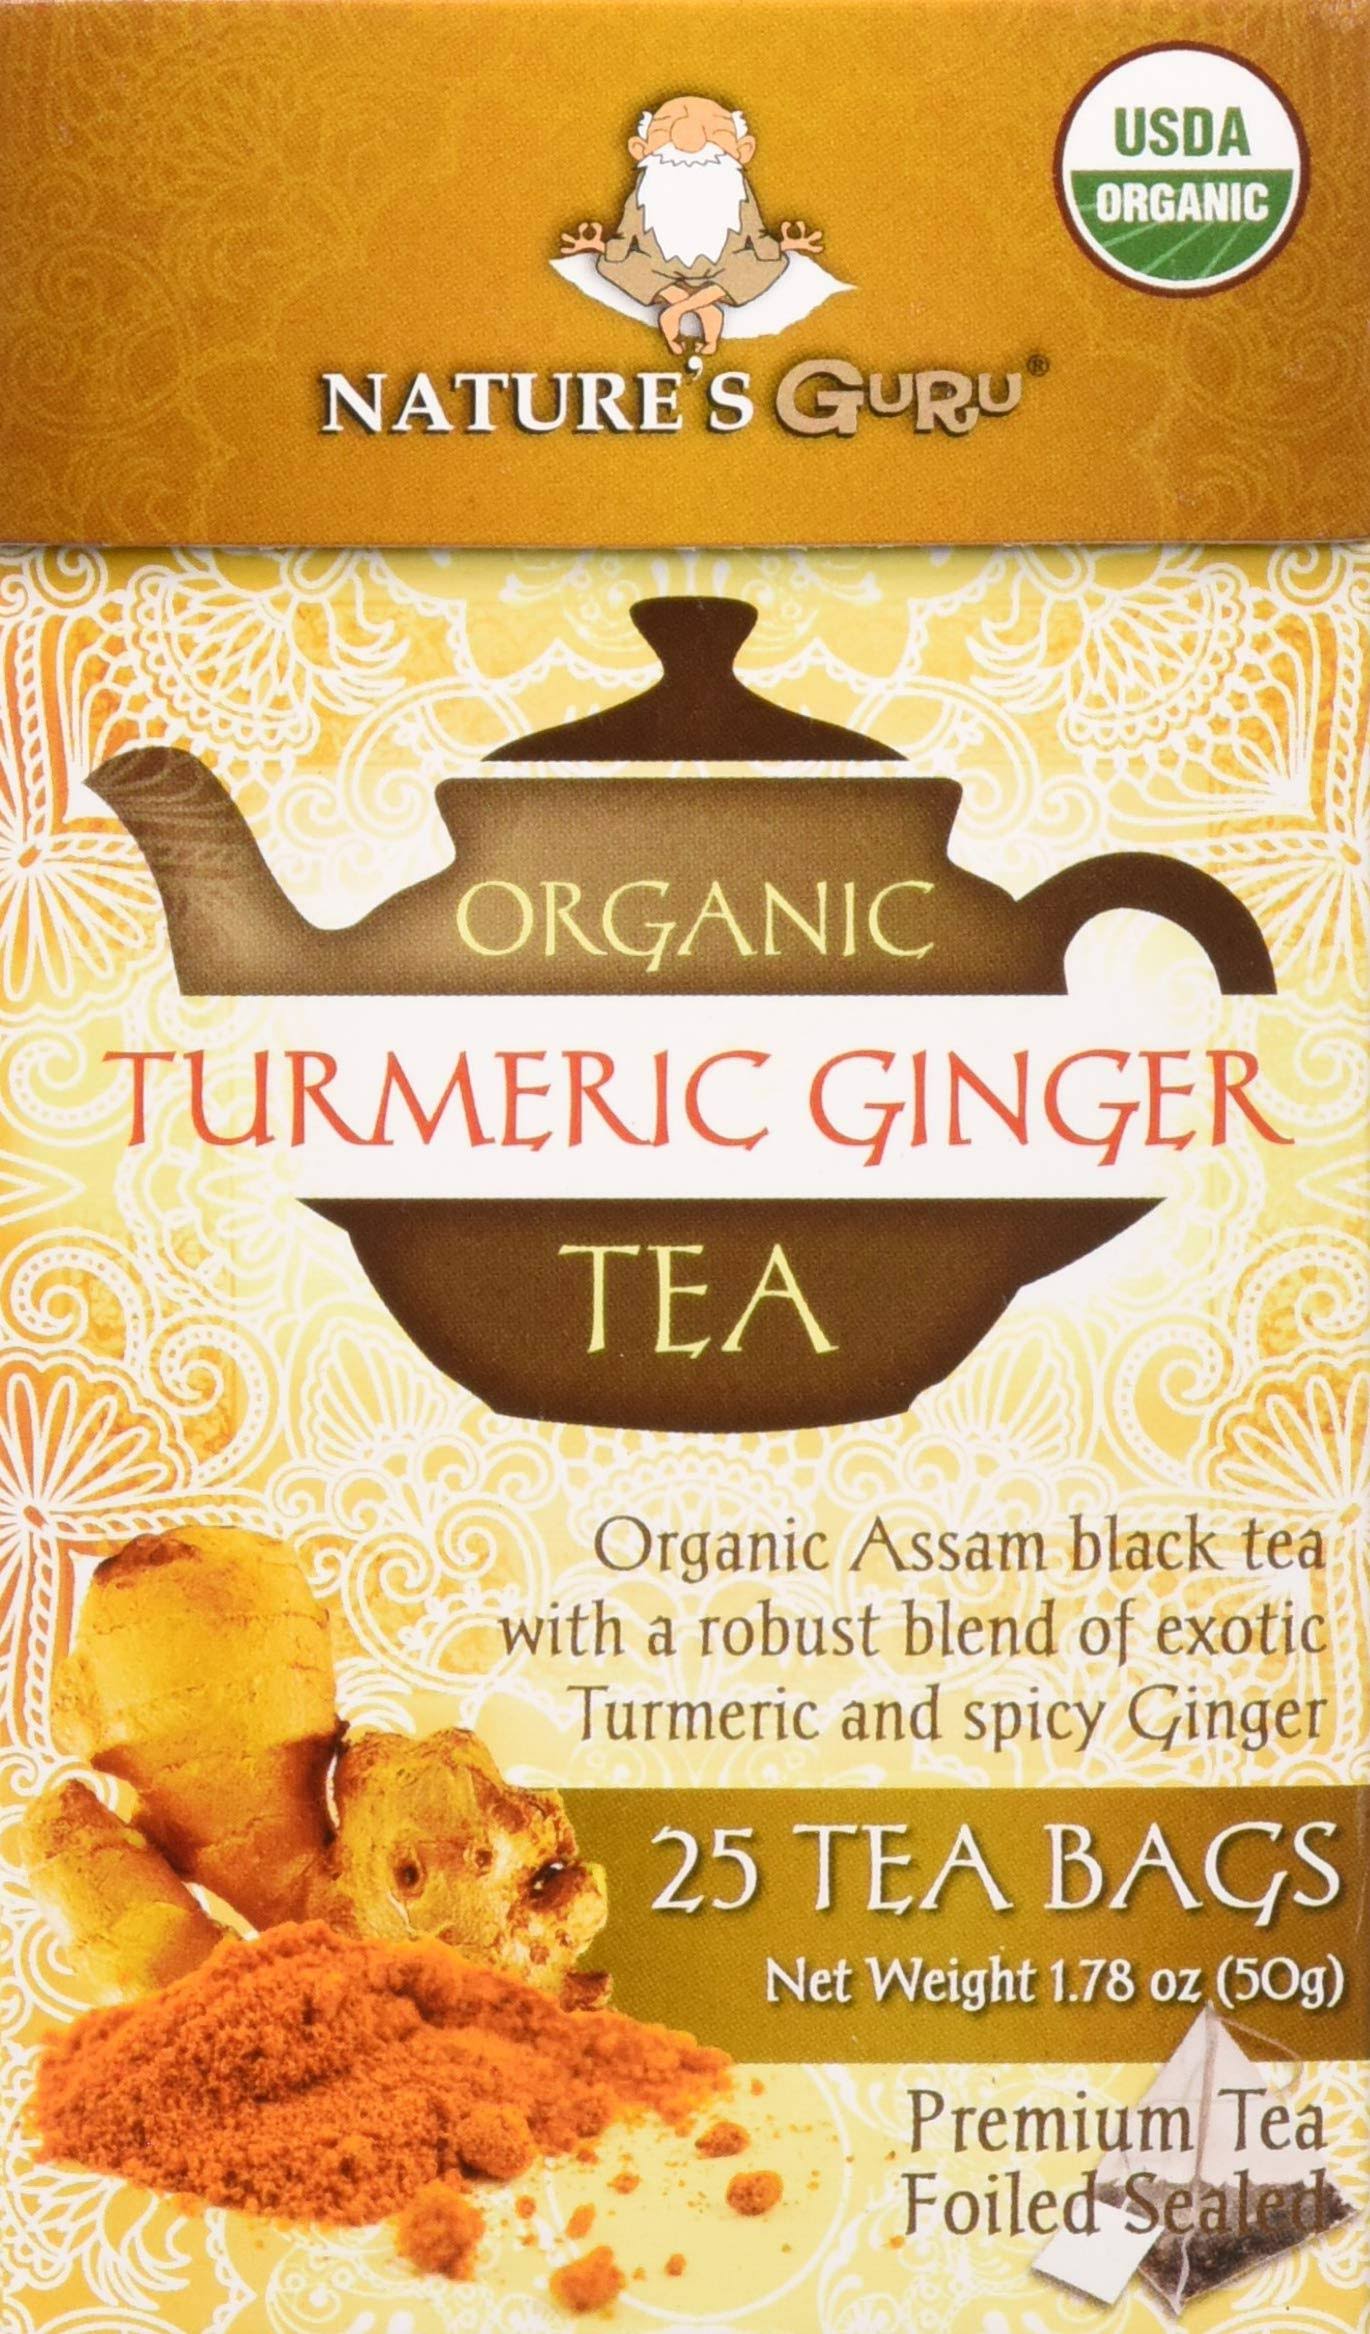 Nature's Guru Organic Turmeric Ginger Tea - India Grocery and Spice - Delivered by Mercato